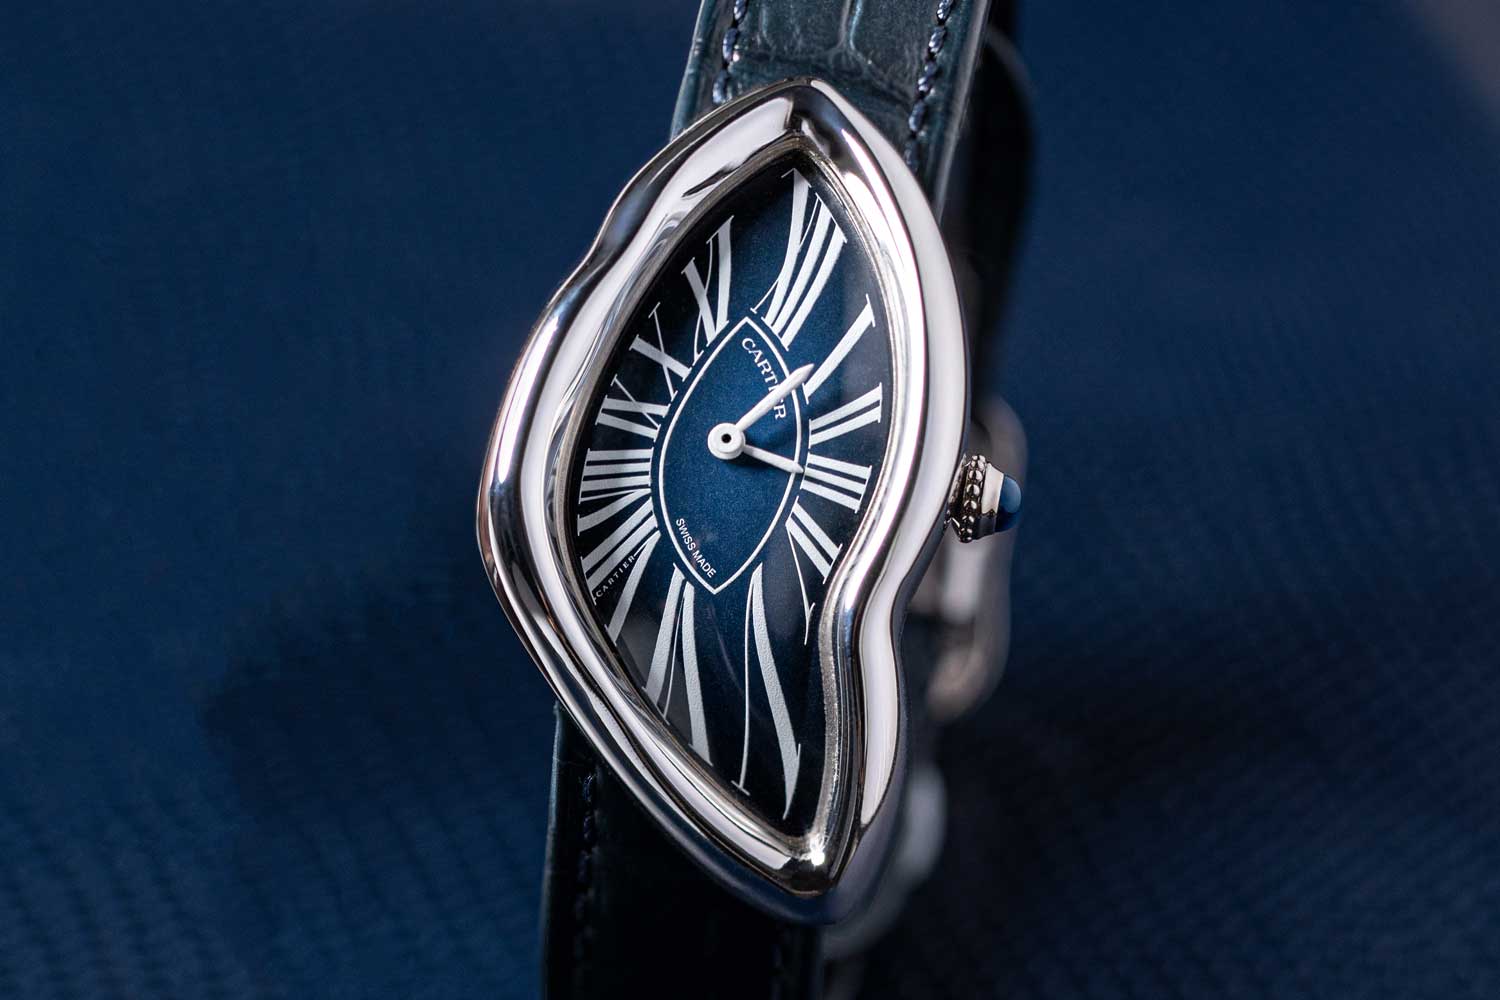 The Cartier Crash First Light has a very subtle fumé effect on the dial that graduates from light in the center to dark at the edges. (image: Revolution©)